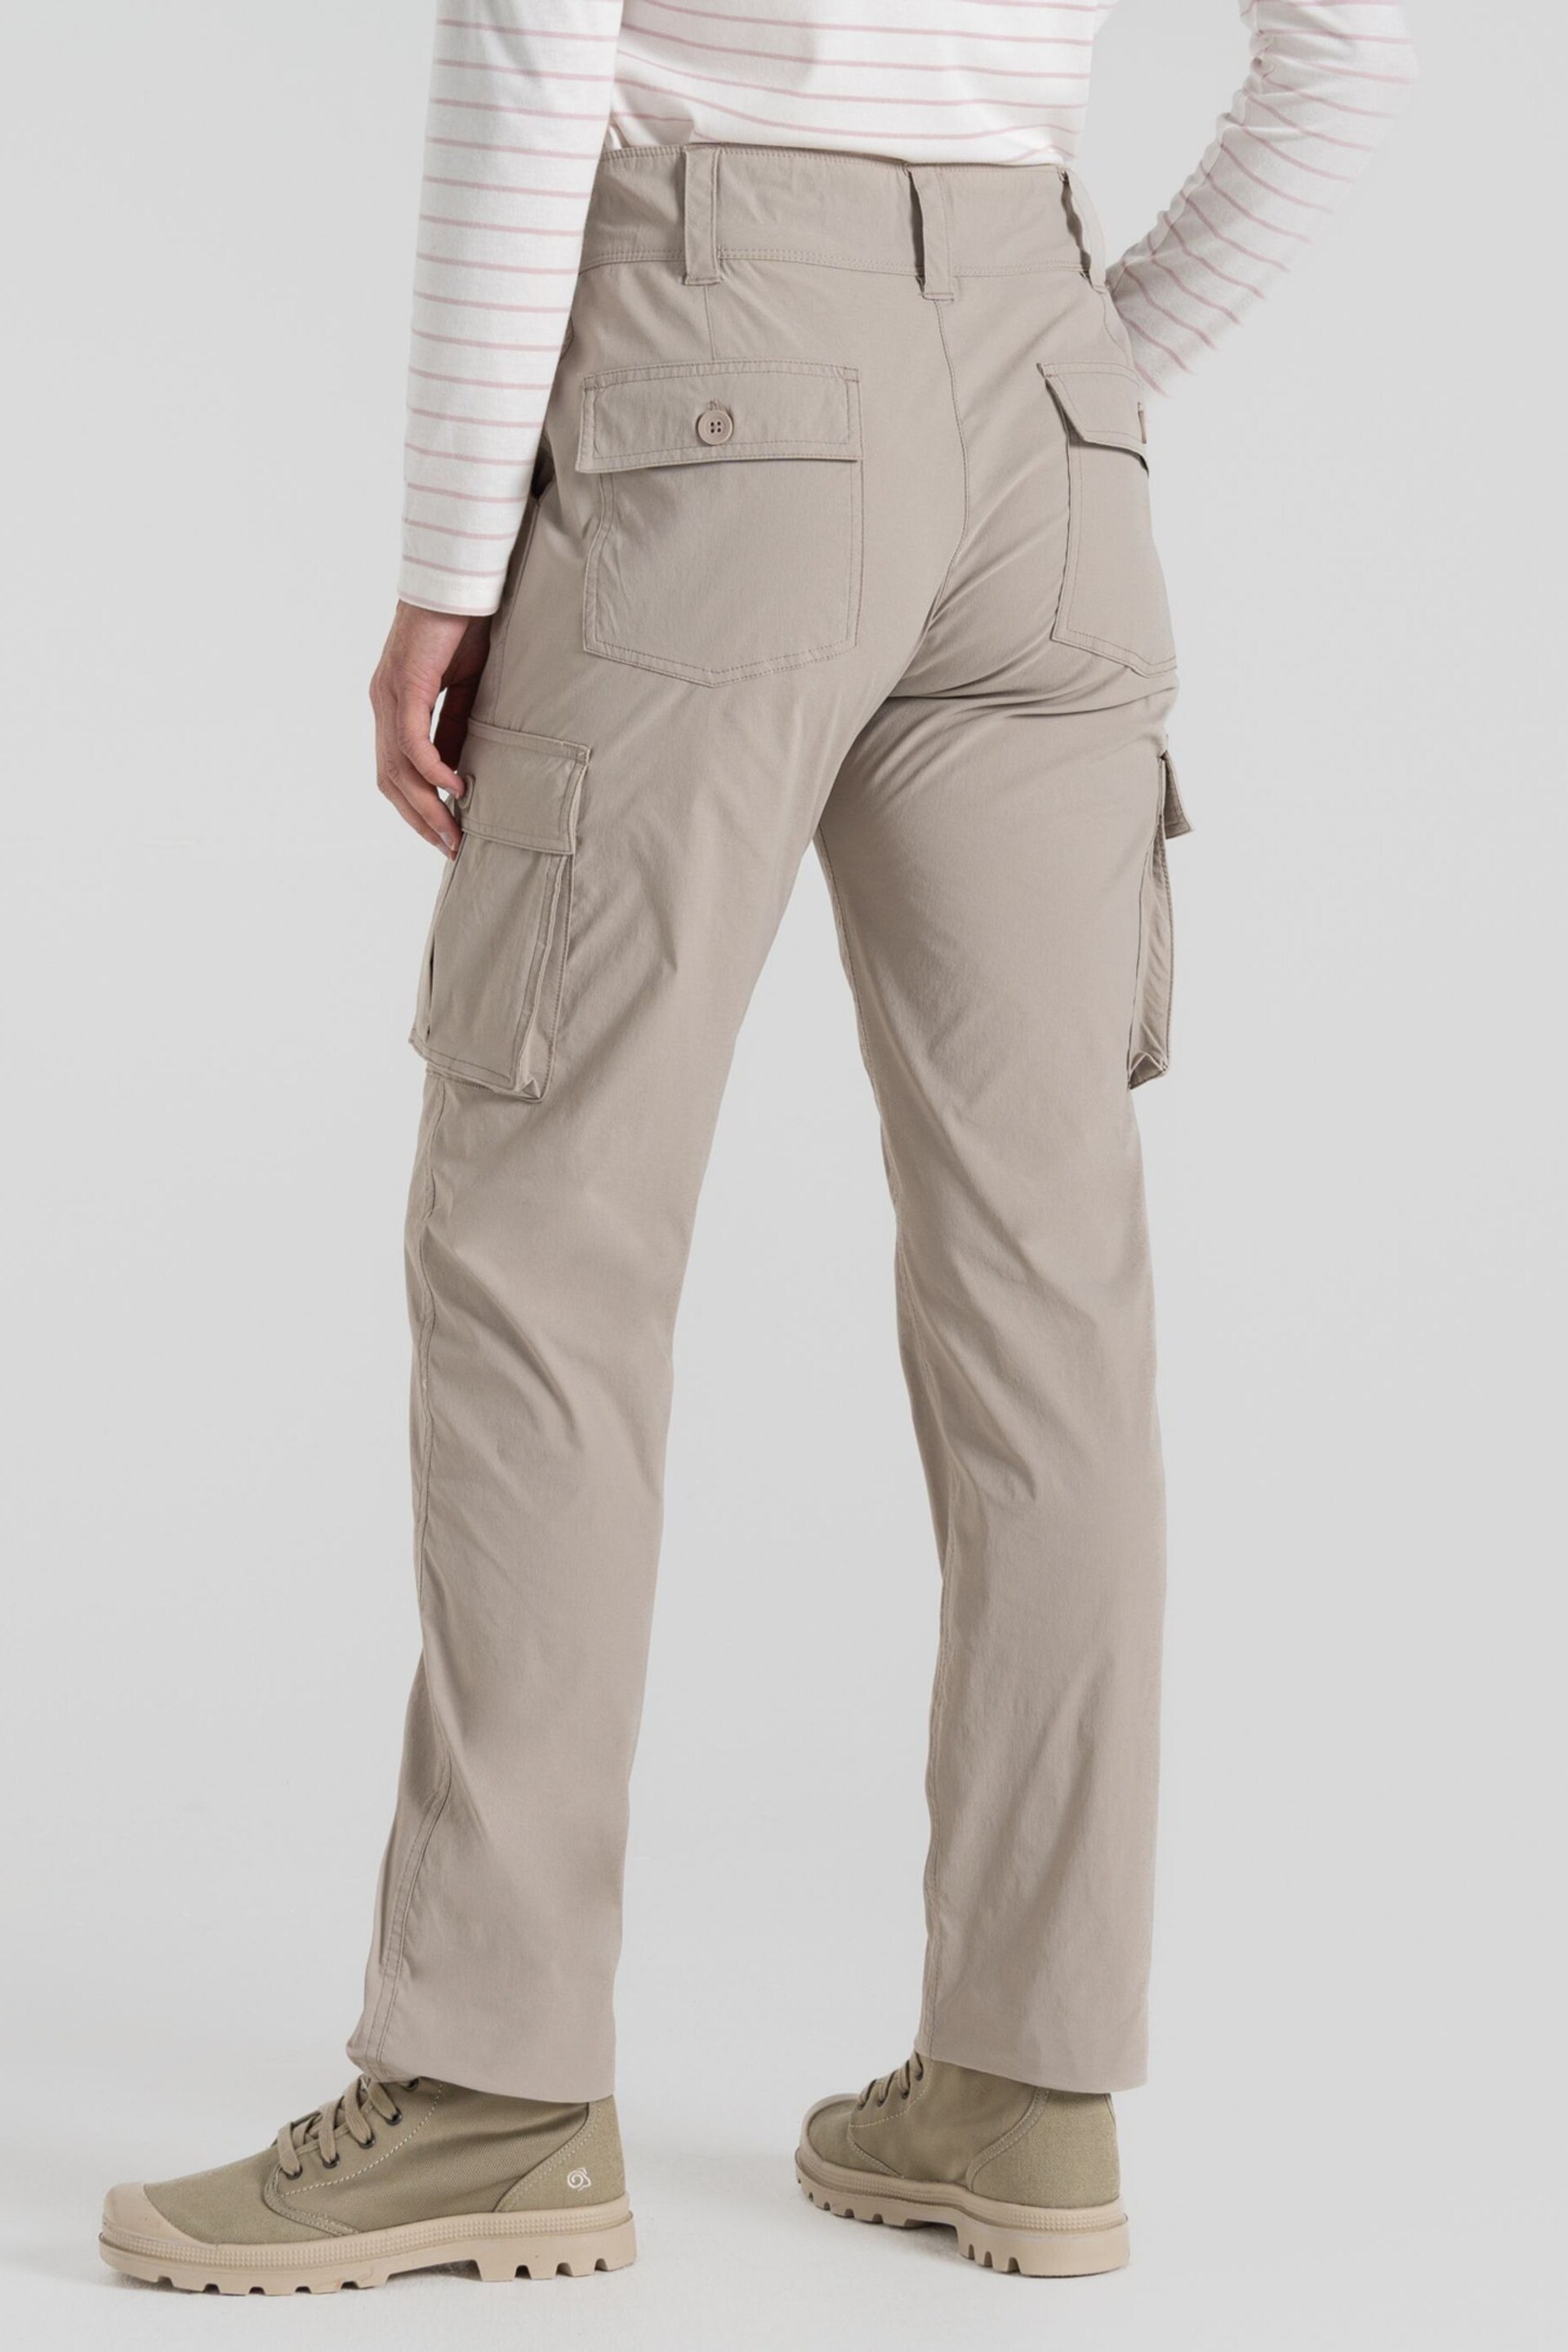 Craghoppers NL Milla Brown Trousers - Image 2 of 5